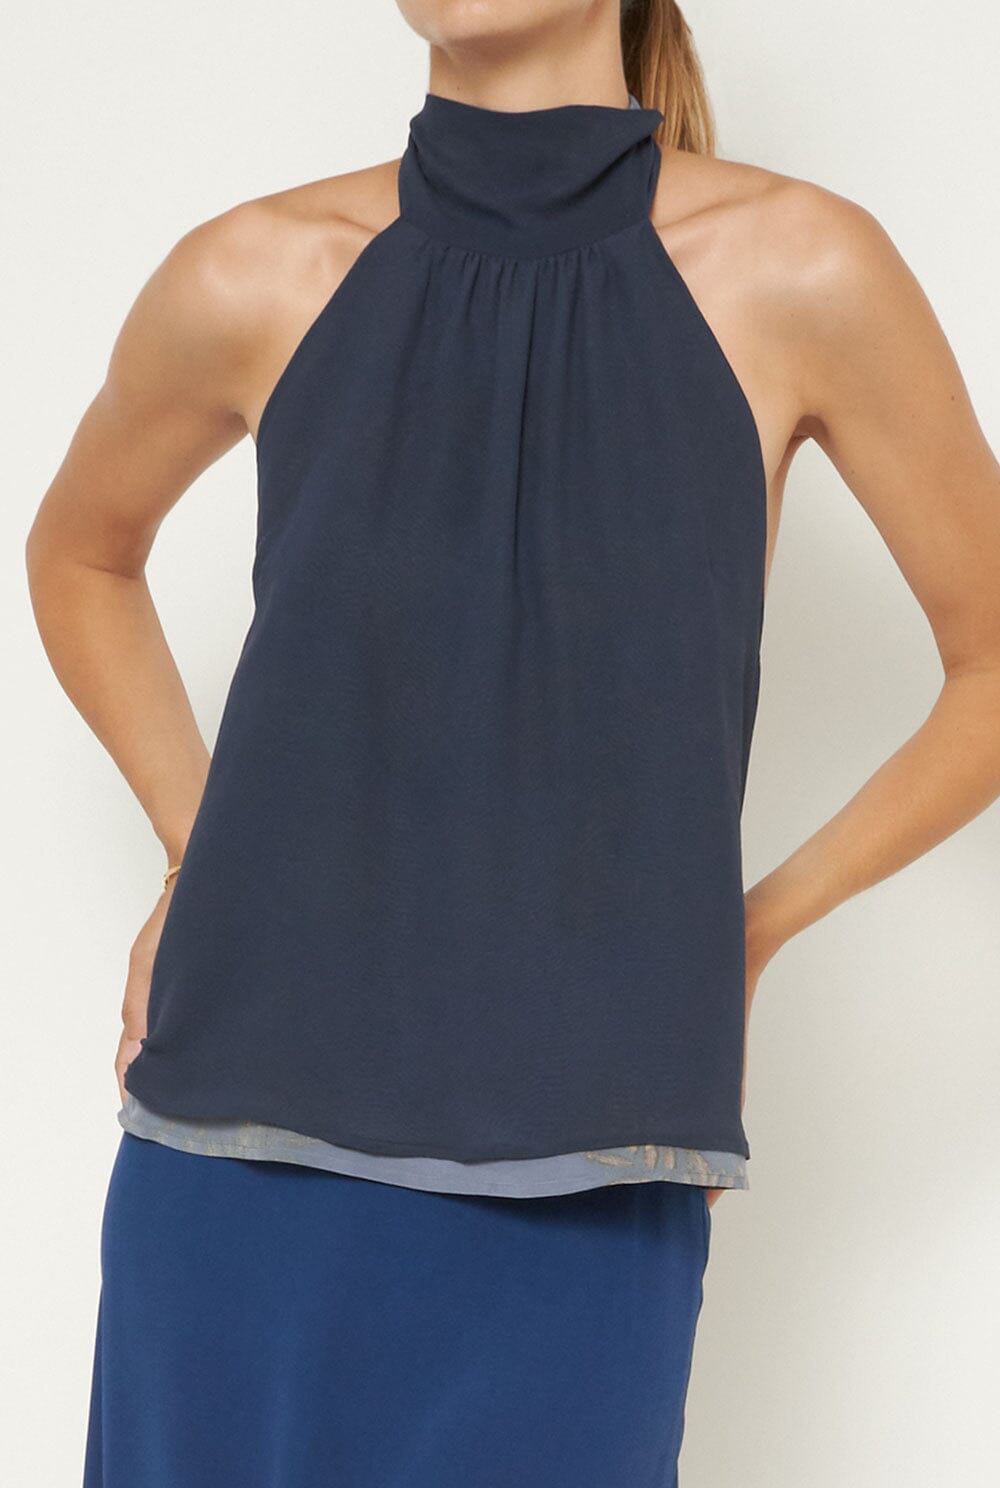 Halter Reversible Ecoprint blue top T-Shirts & tops Atelier Aletheia 